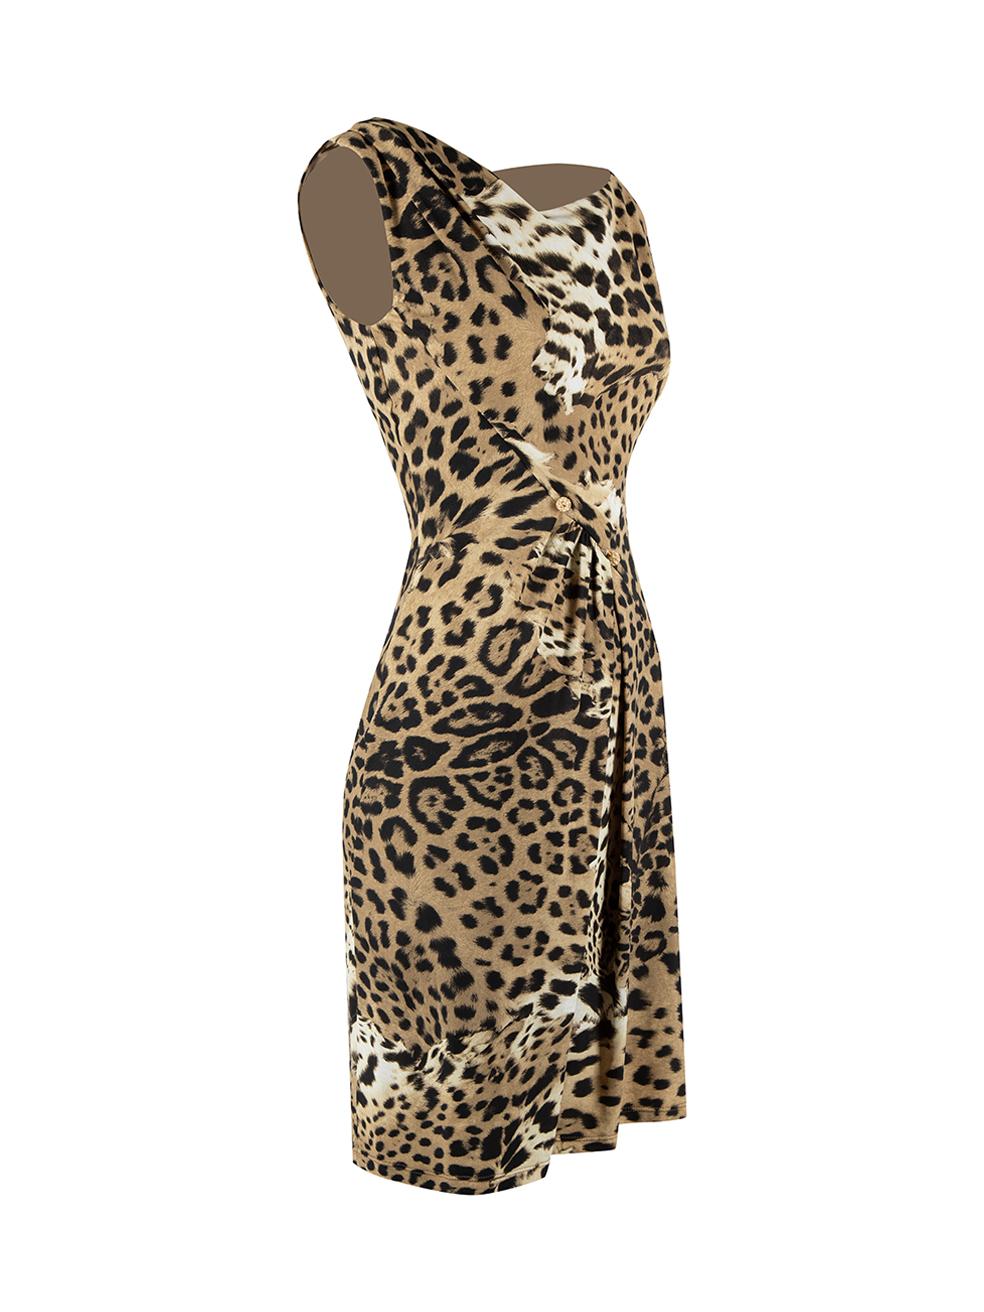 CONDITION is Very good. Hardly any visible wear to dress is evident on this used Roberto Cavalli designer resale item.




Details


Brown

Synthetic

Knee length dress

Stretchy and bodycon

Leopard print pattern

Boat neckline

Gemstone pin accent